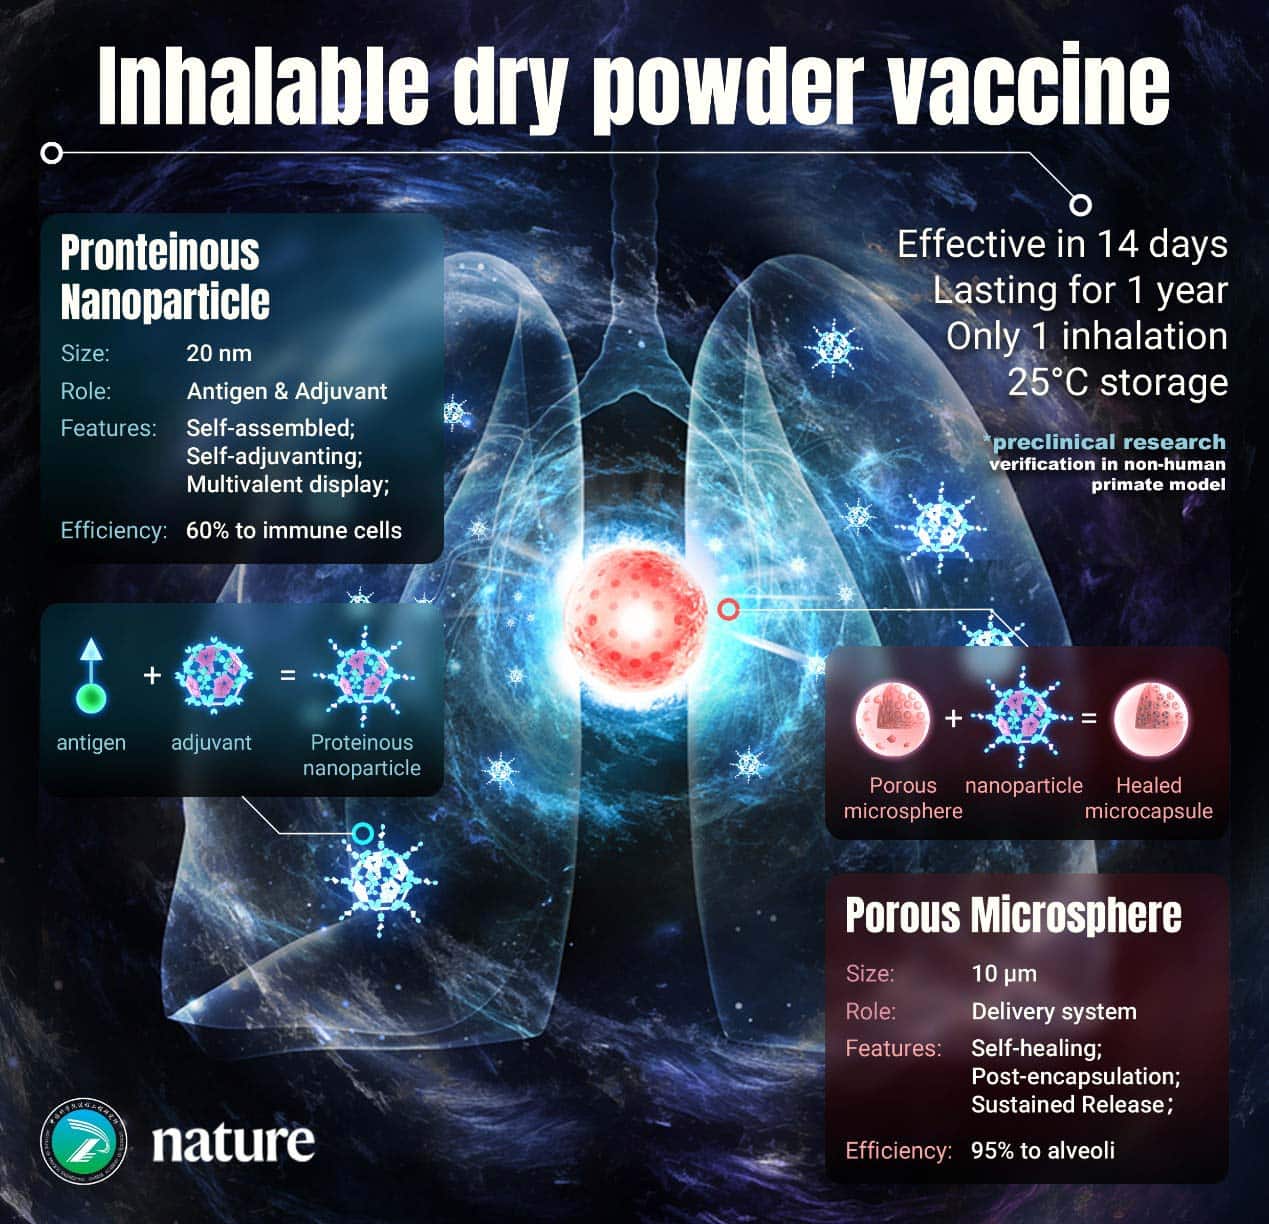 Construction of single-dose, dry powder inhalation vaccine (Image by MA Guanghui’s group)